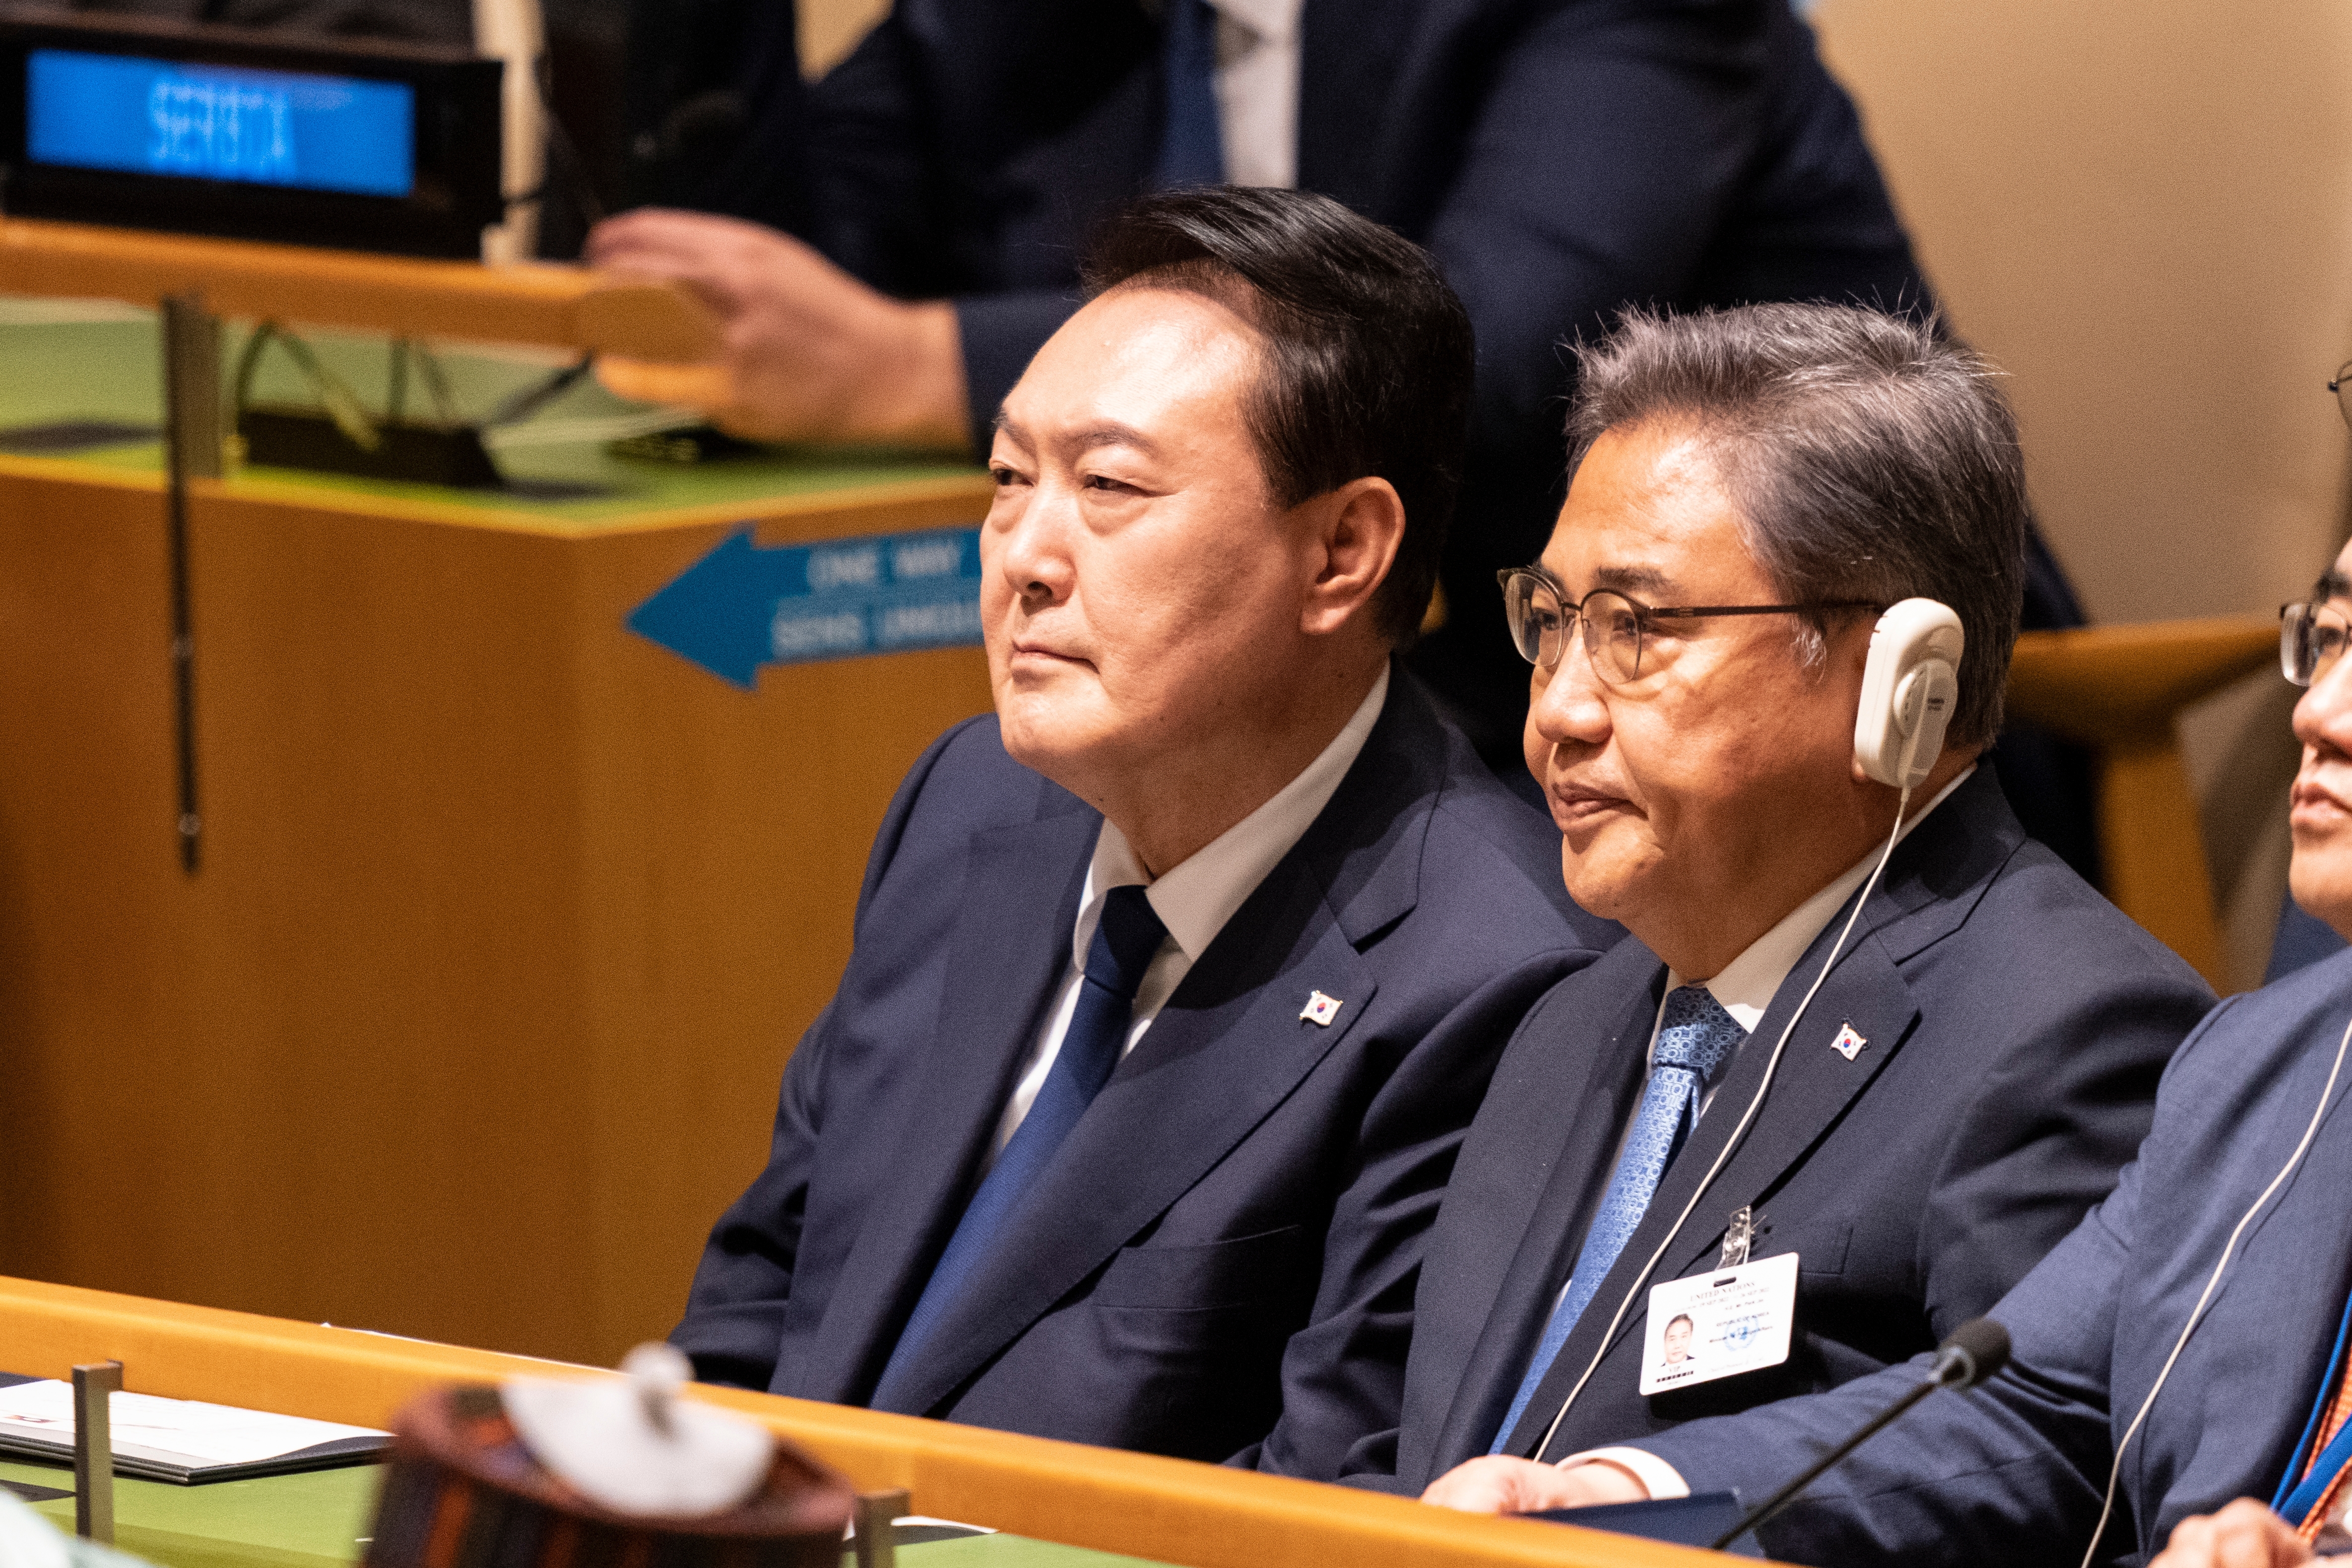 [ADRN Issue Briefing] Strengthening South Korean Value Diplomacy for U.S.-South Korean Normative Alignment